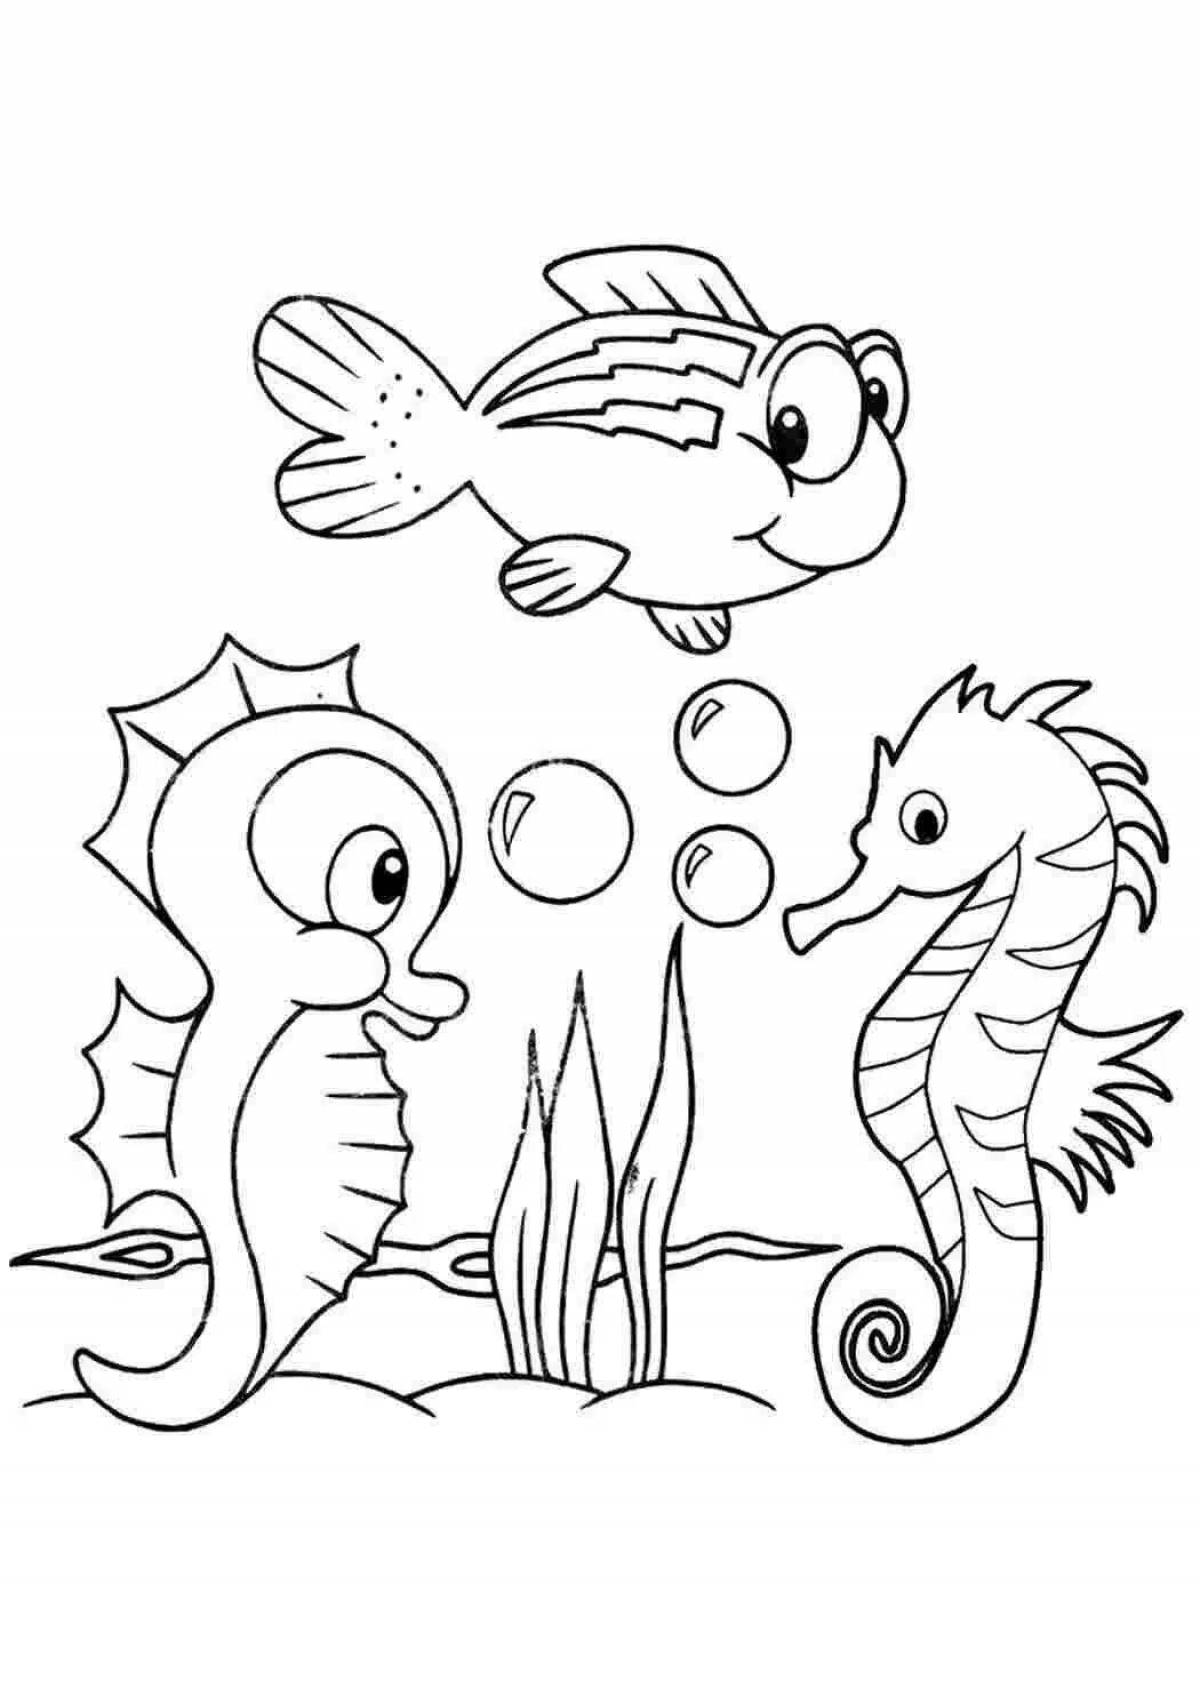 Funny marine life coloring book for 3-4 year olds